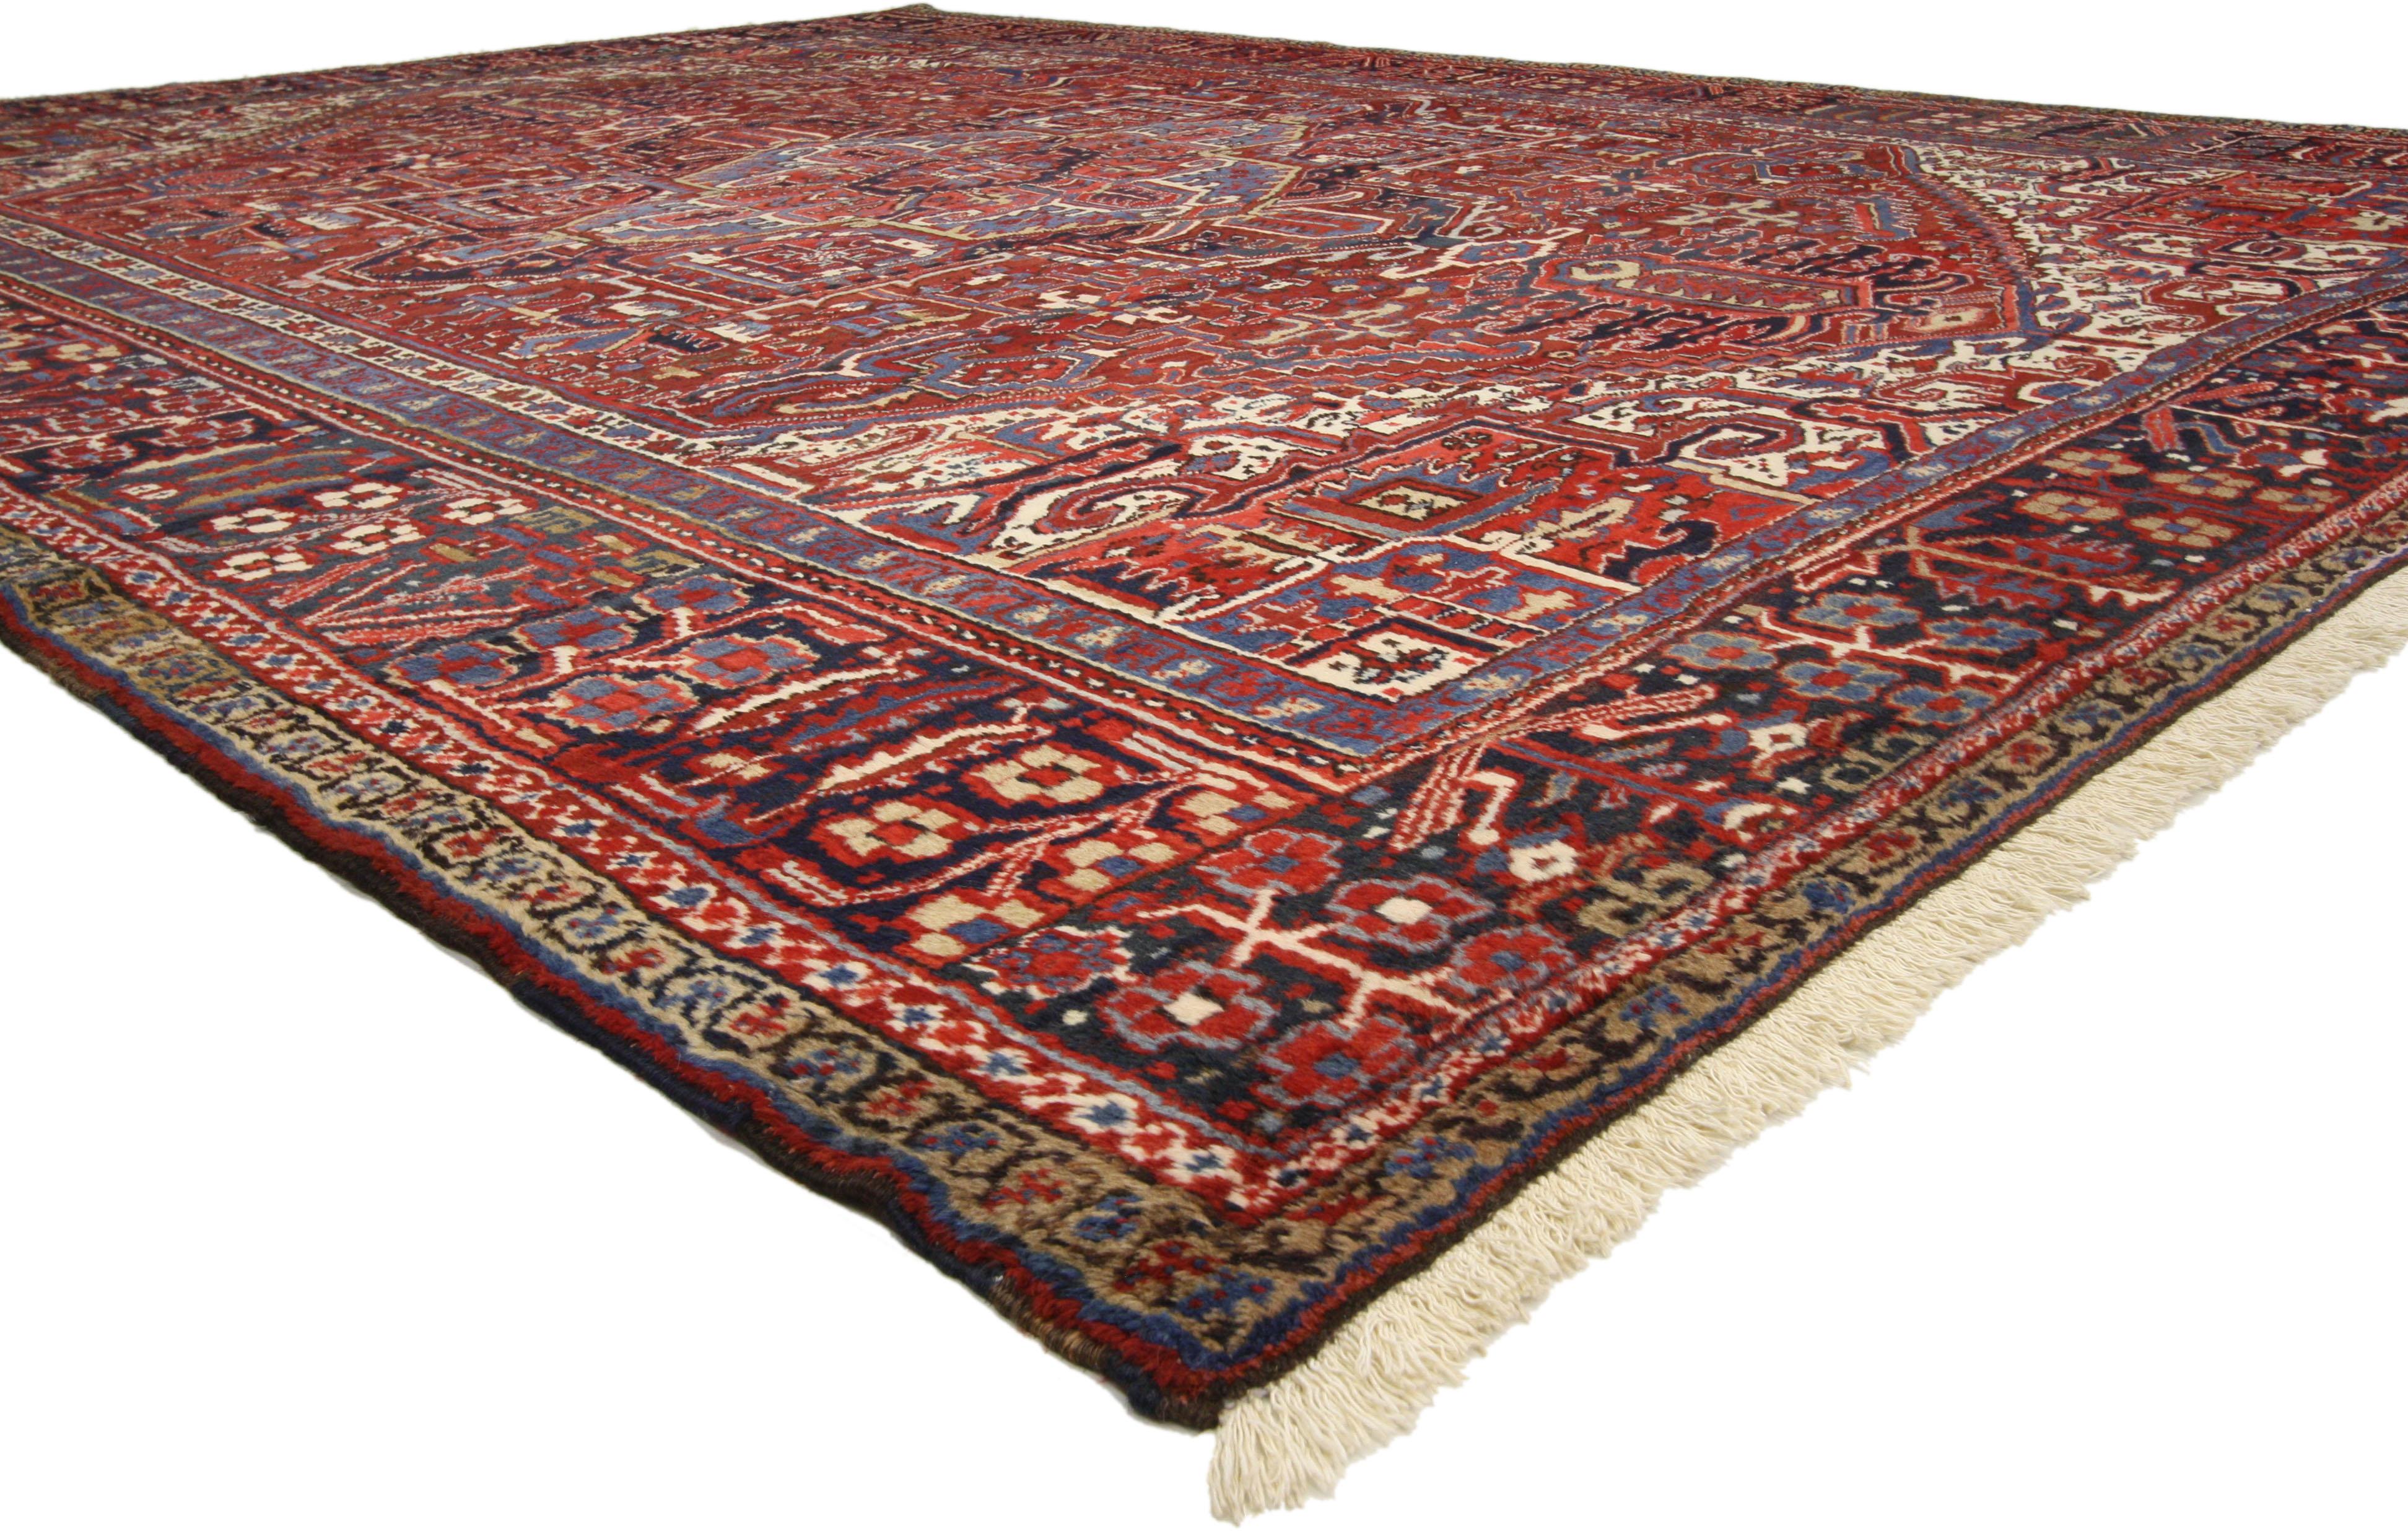 76322 Vintage Persian Heriz Area rug with Mid-Century Modern Craftsman style. Impeccably woven from hand-knotted wool, this vintage Persian Heriz rug with Mid-Century Modern Craftsman style features a large center octagram medallion anchored with